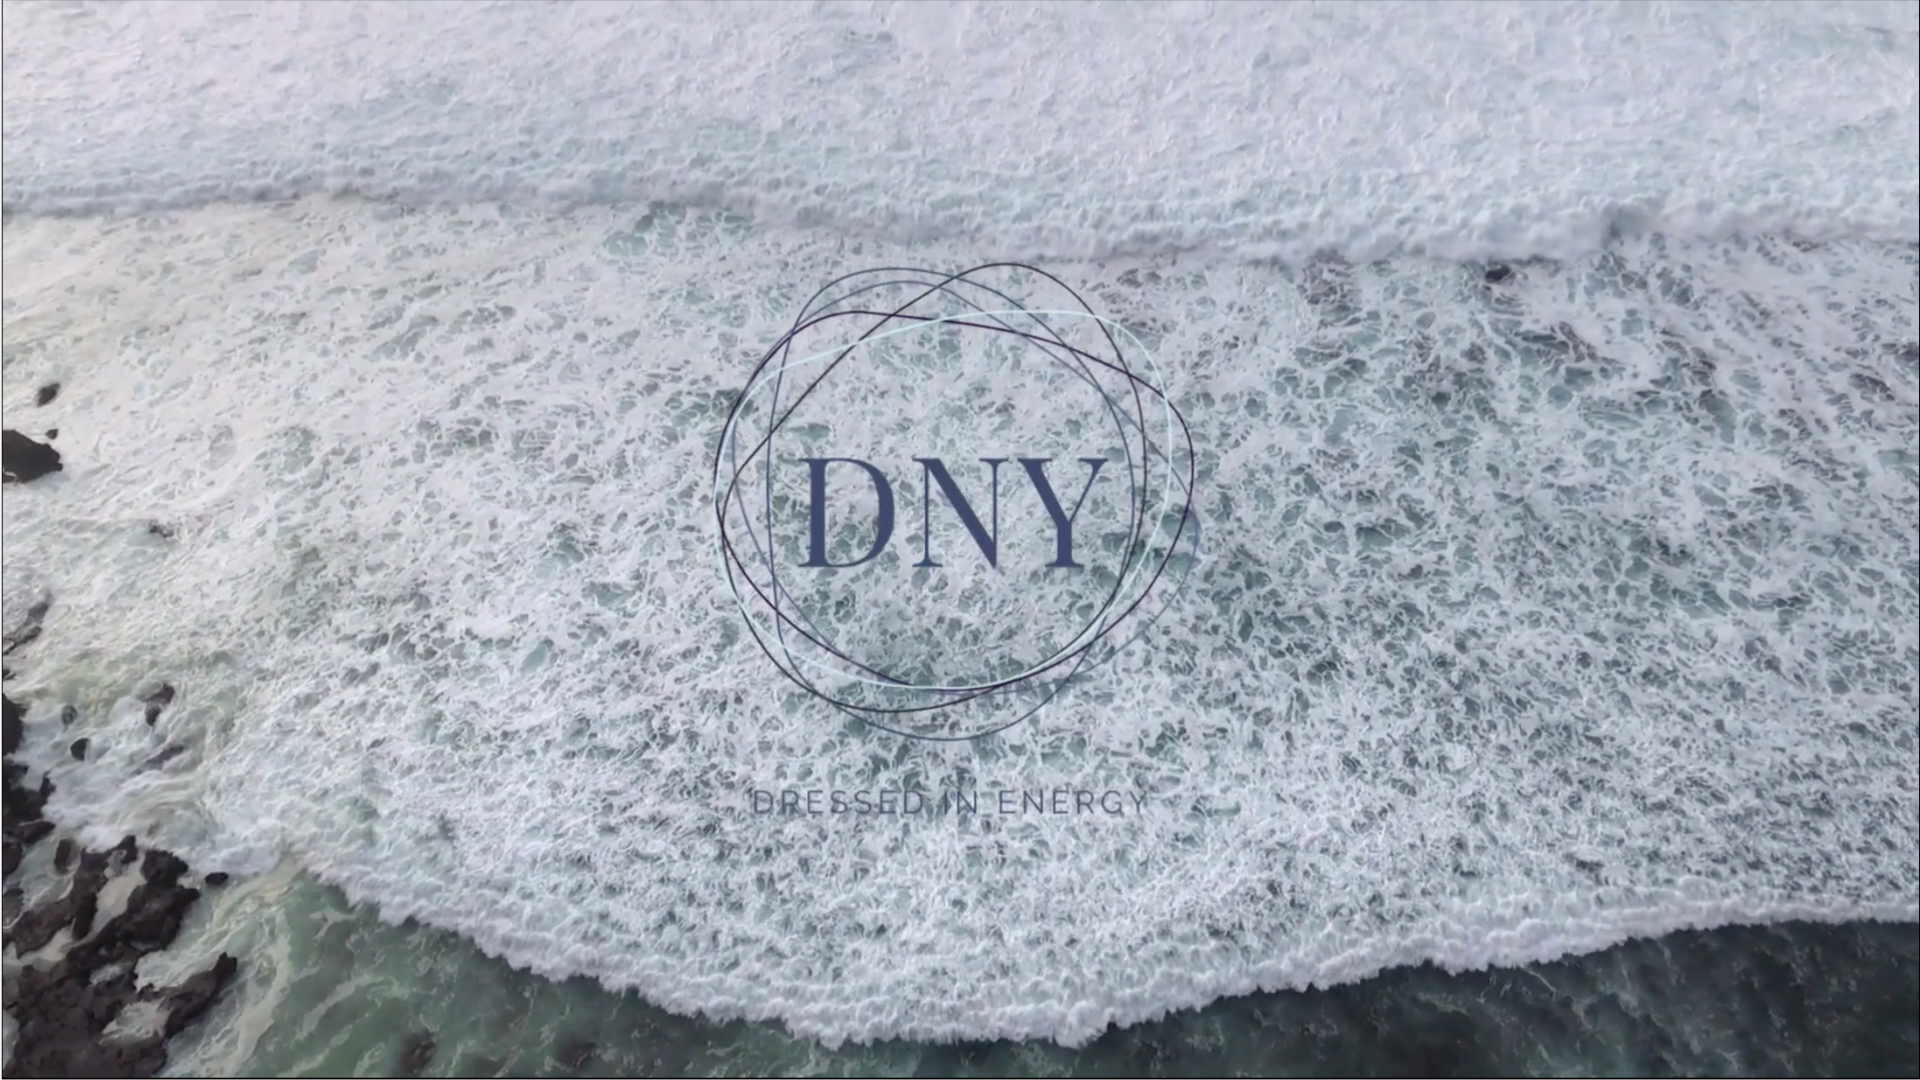 Load video: DNY - Dressed in Energy creates power by transferring energy into clothing and back to yourself